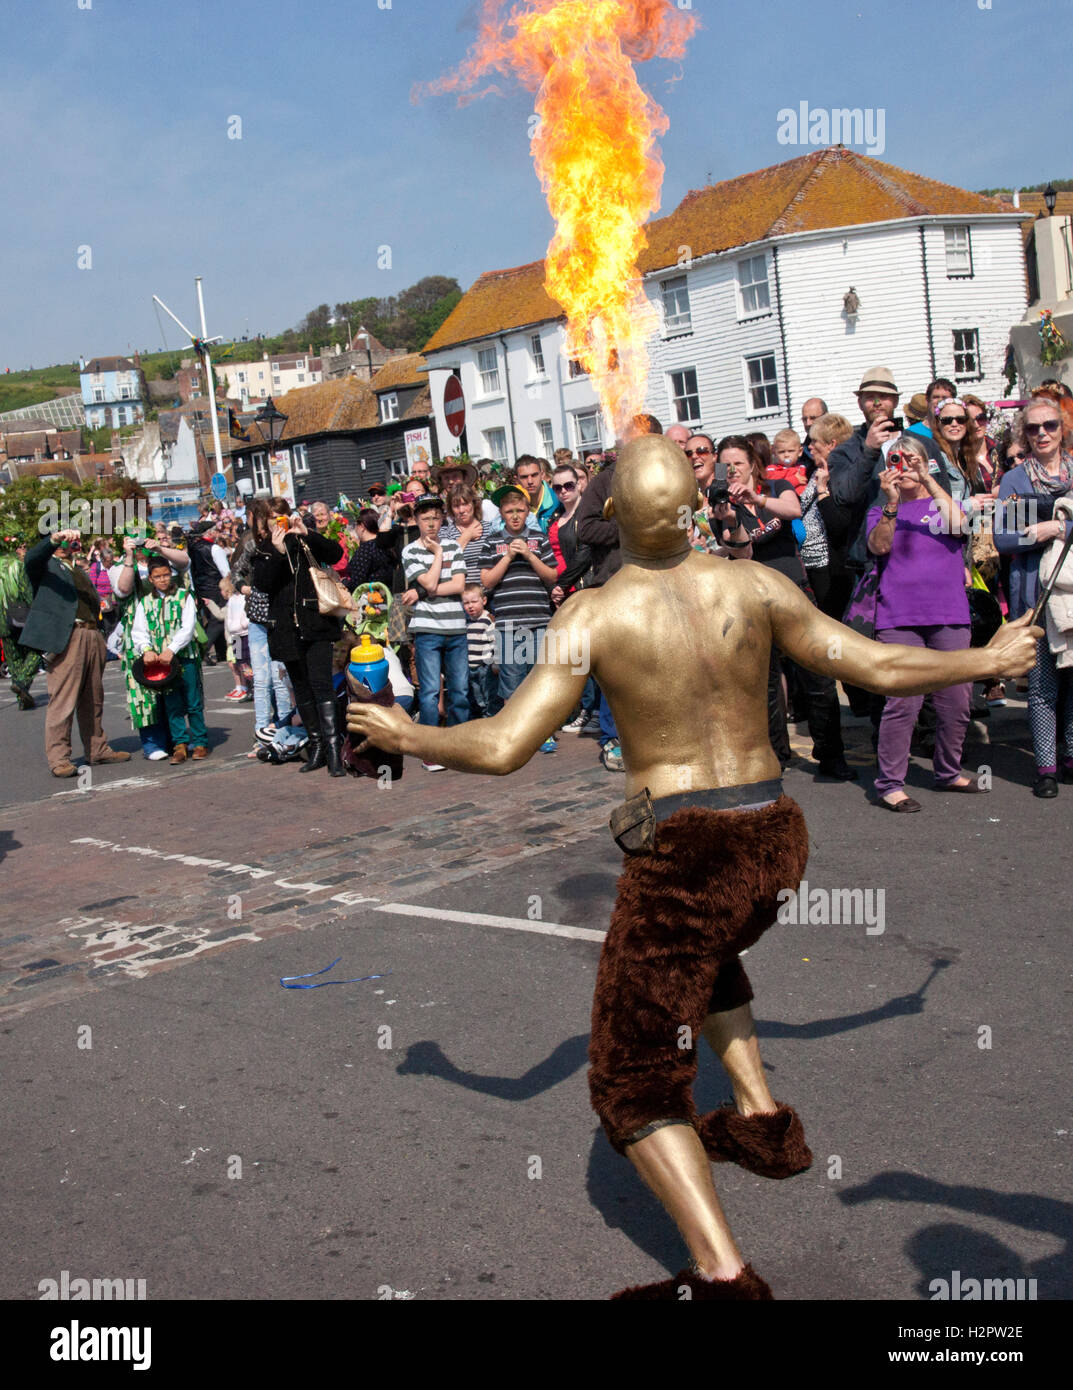 Fire eater at a May Day parade Stock Photo